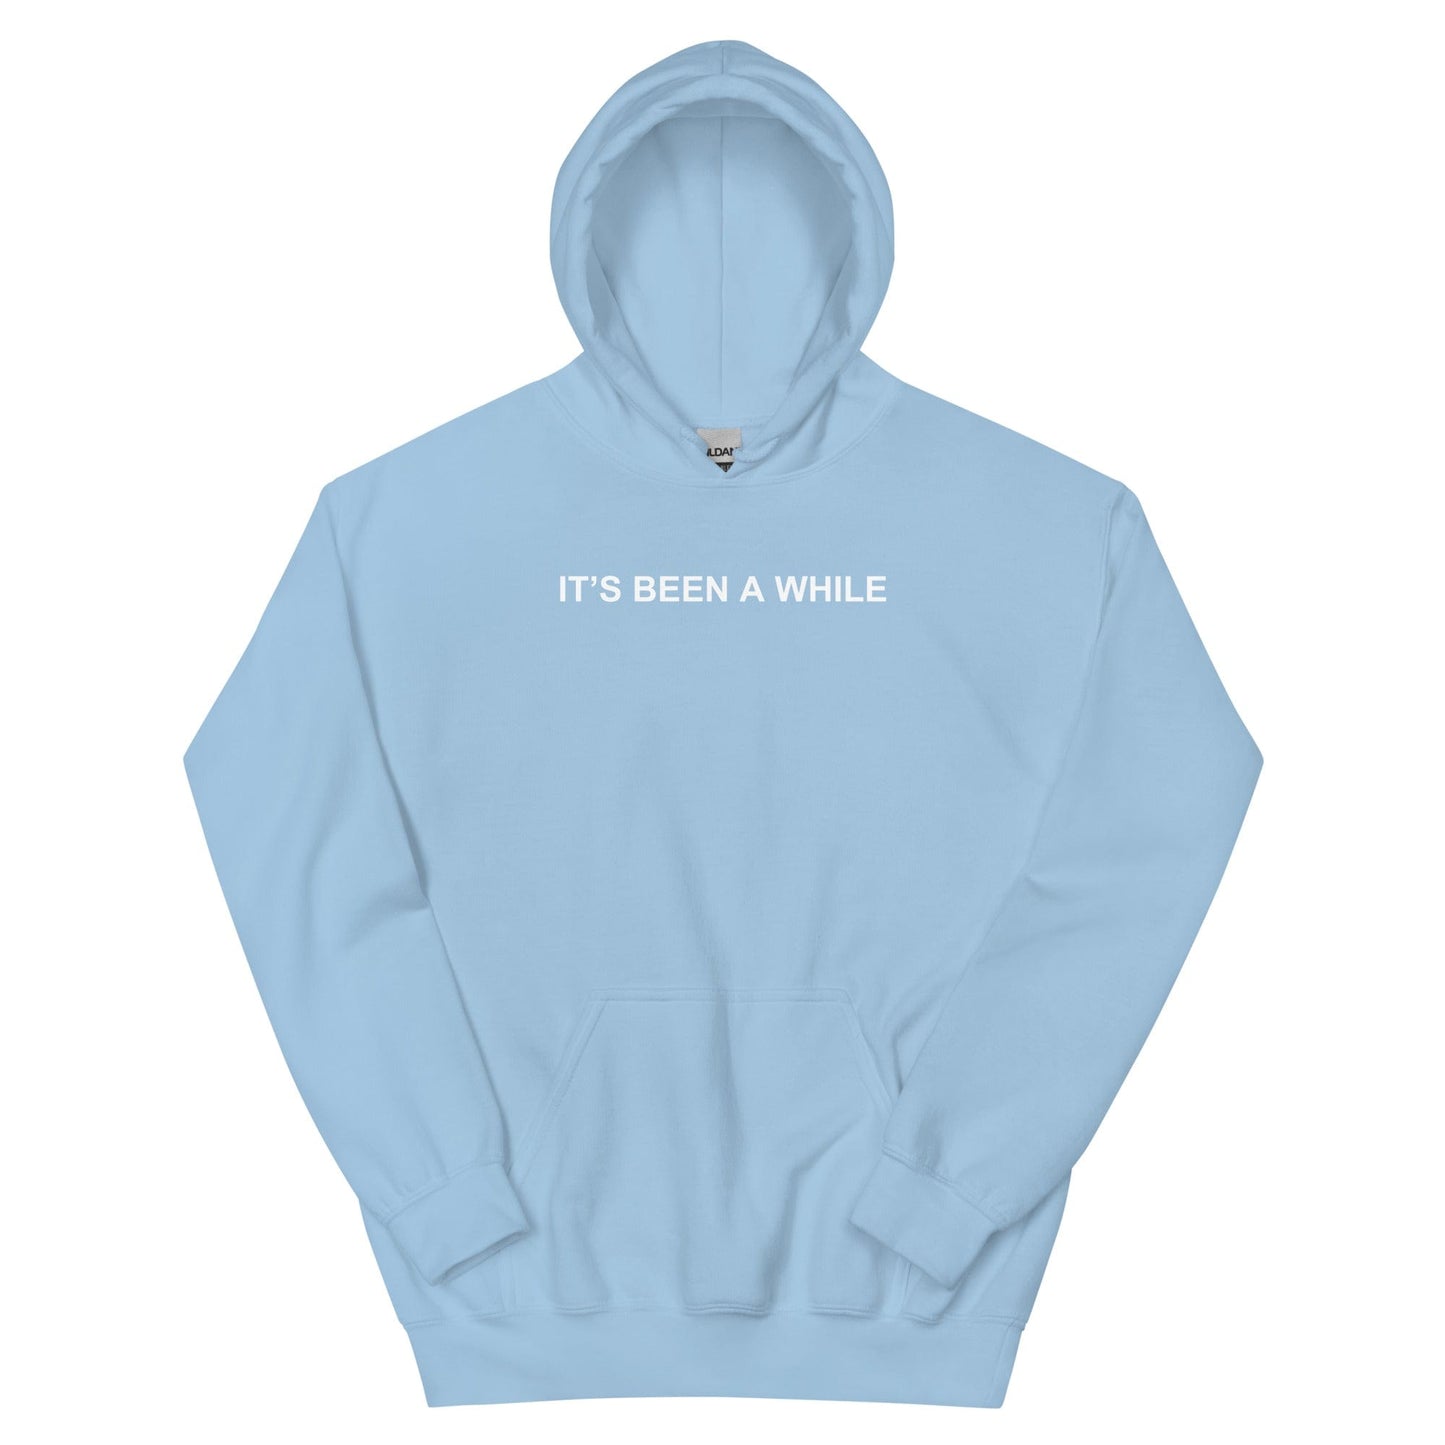 Call Your Parents They Miss You Hoodie